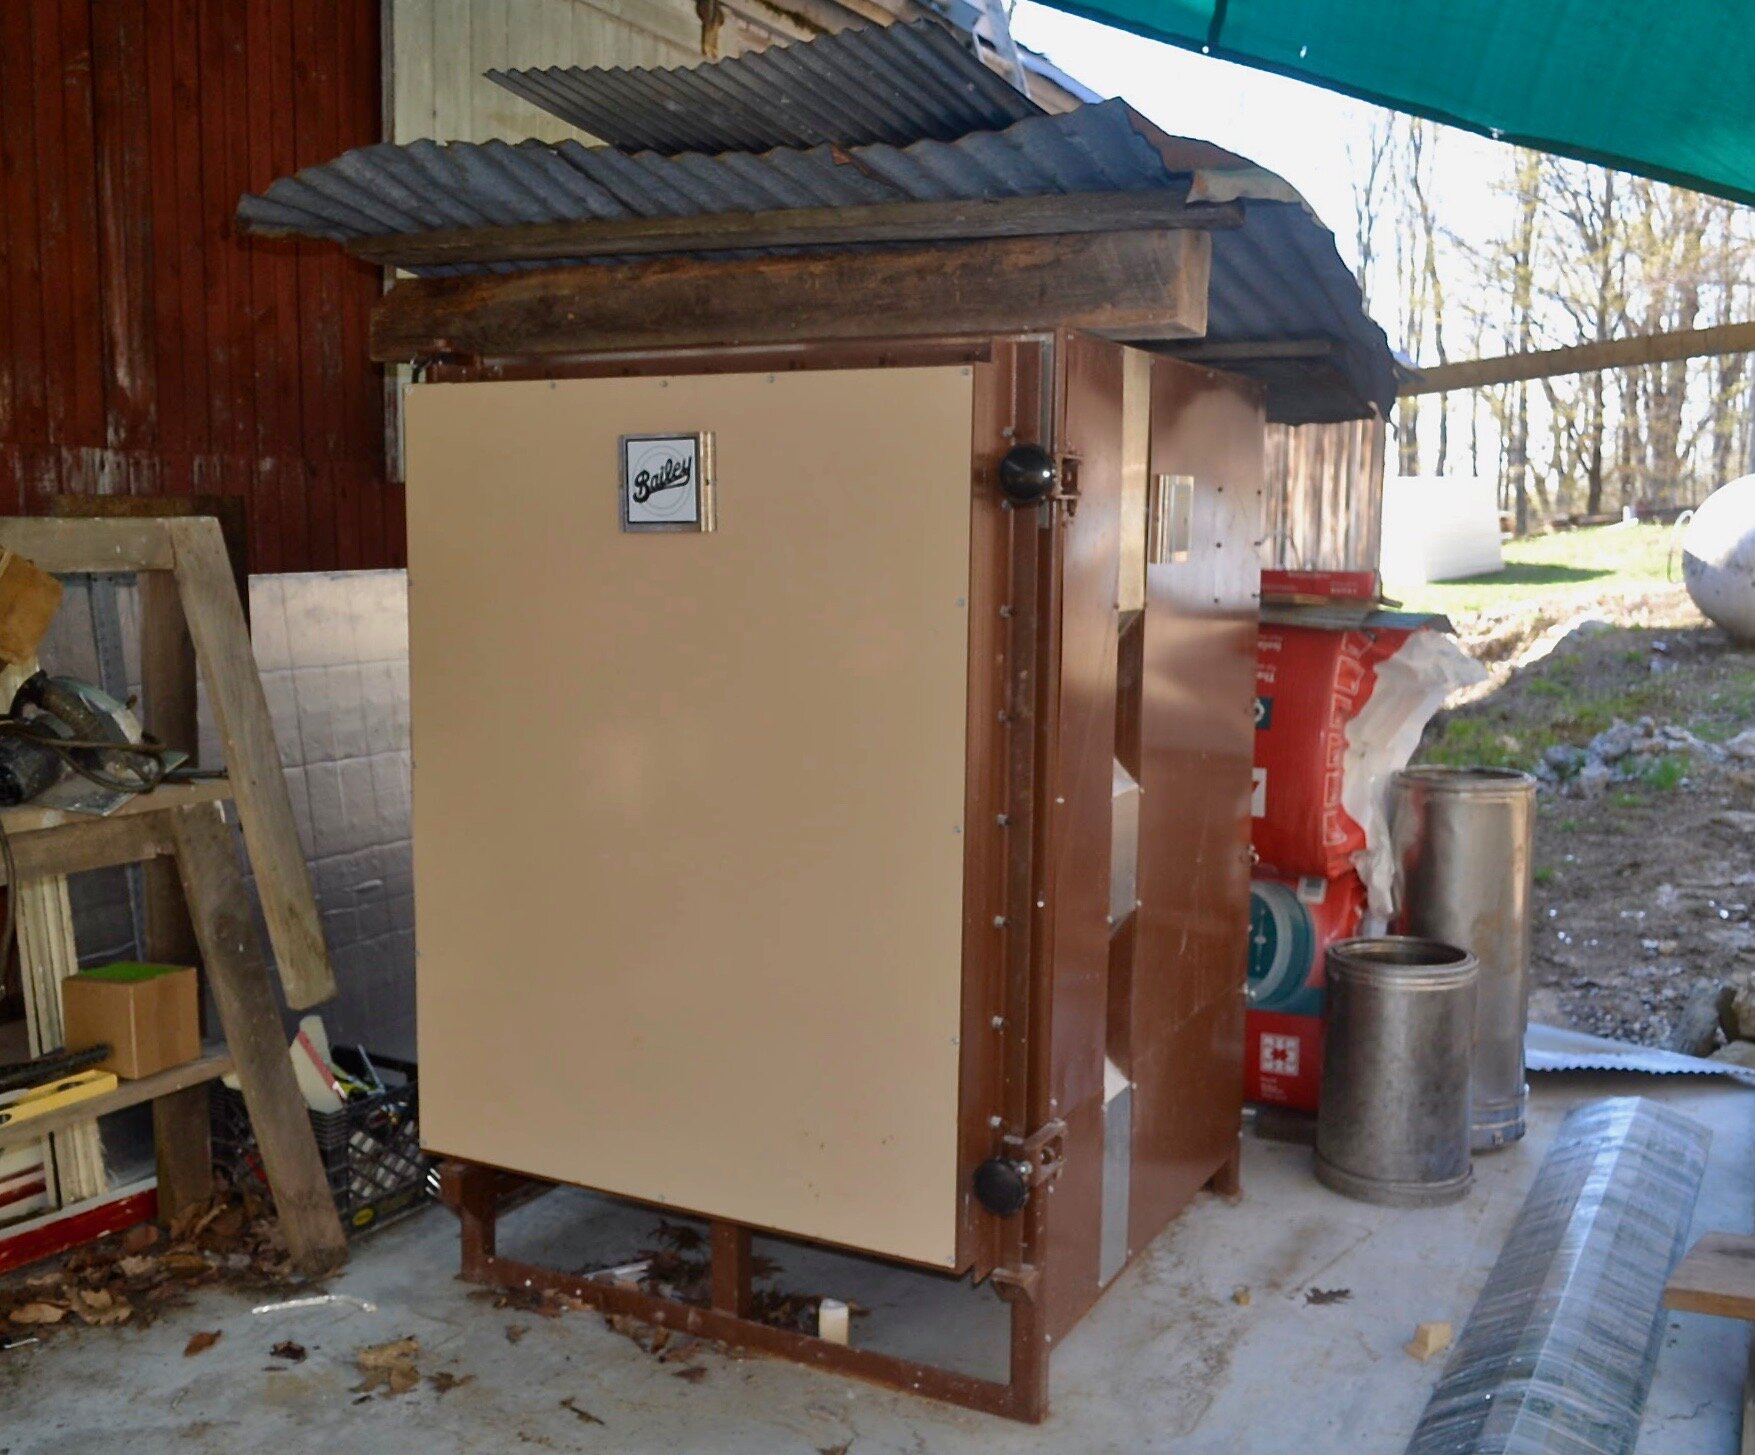 USED (NEW TO ME) BAILEY GAS KILN